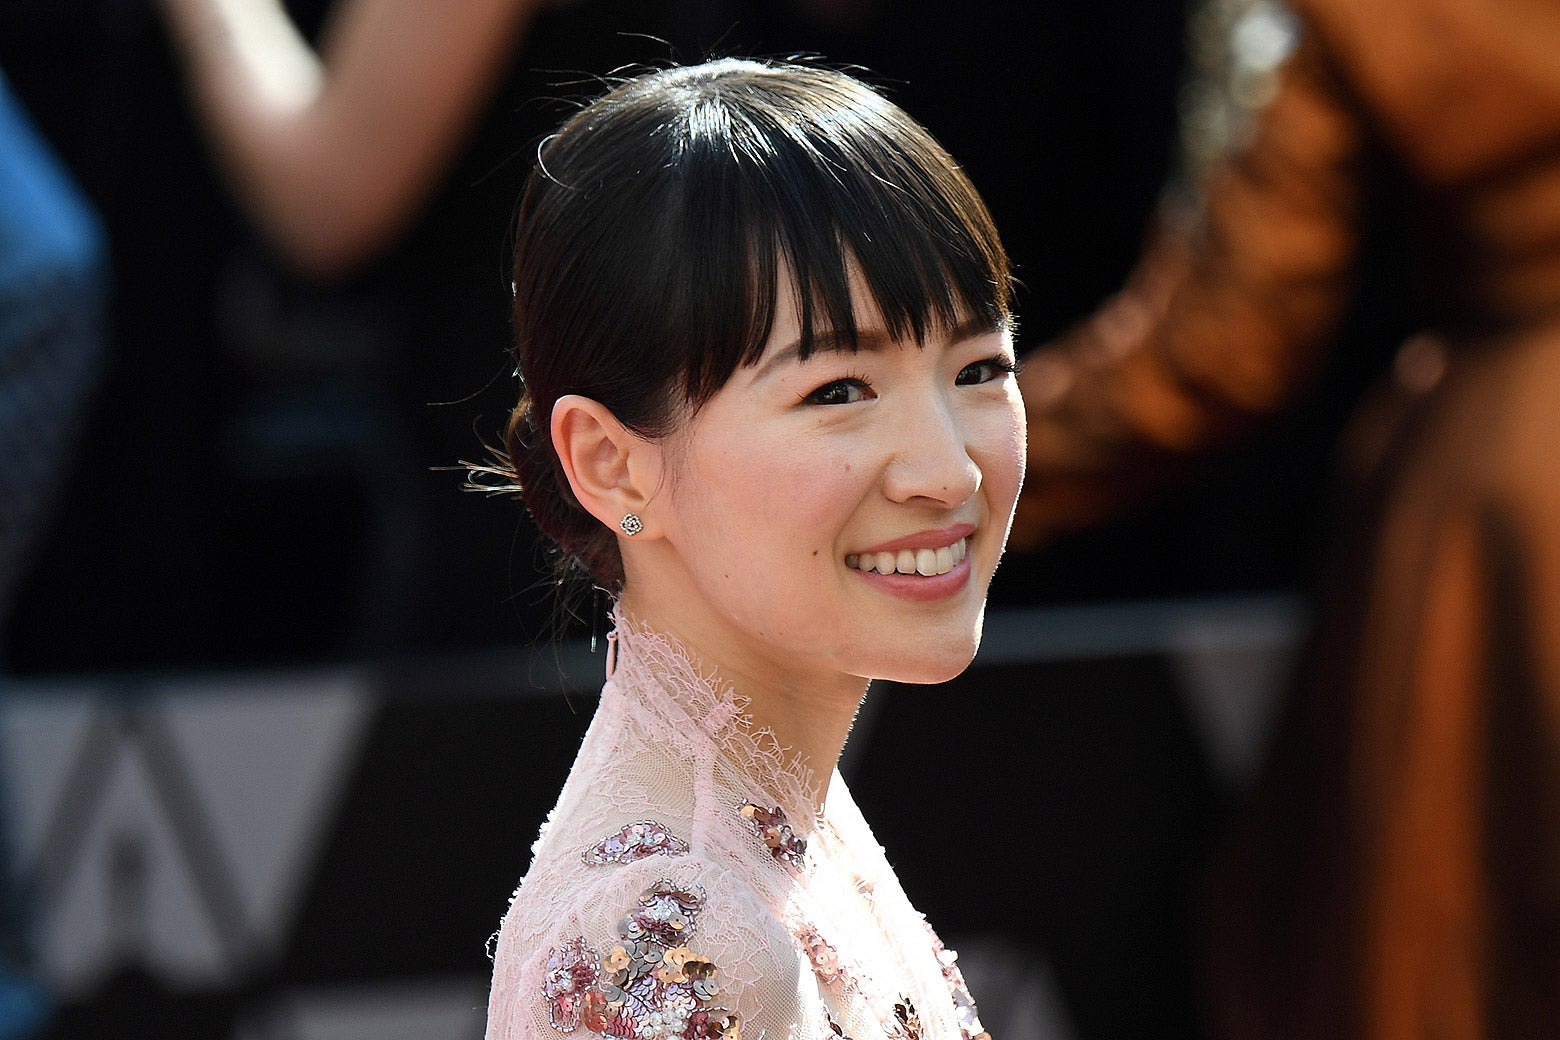 Marie Kondo smiling on a red carpet.